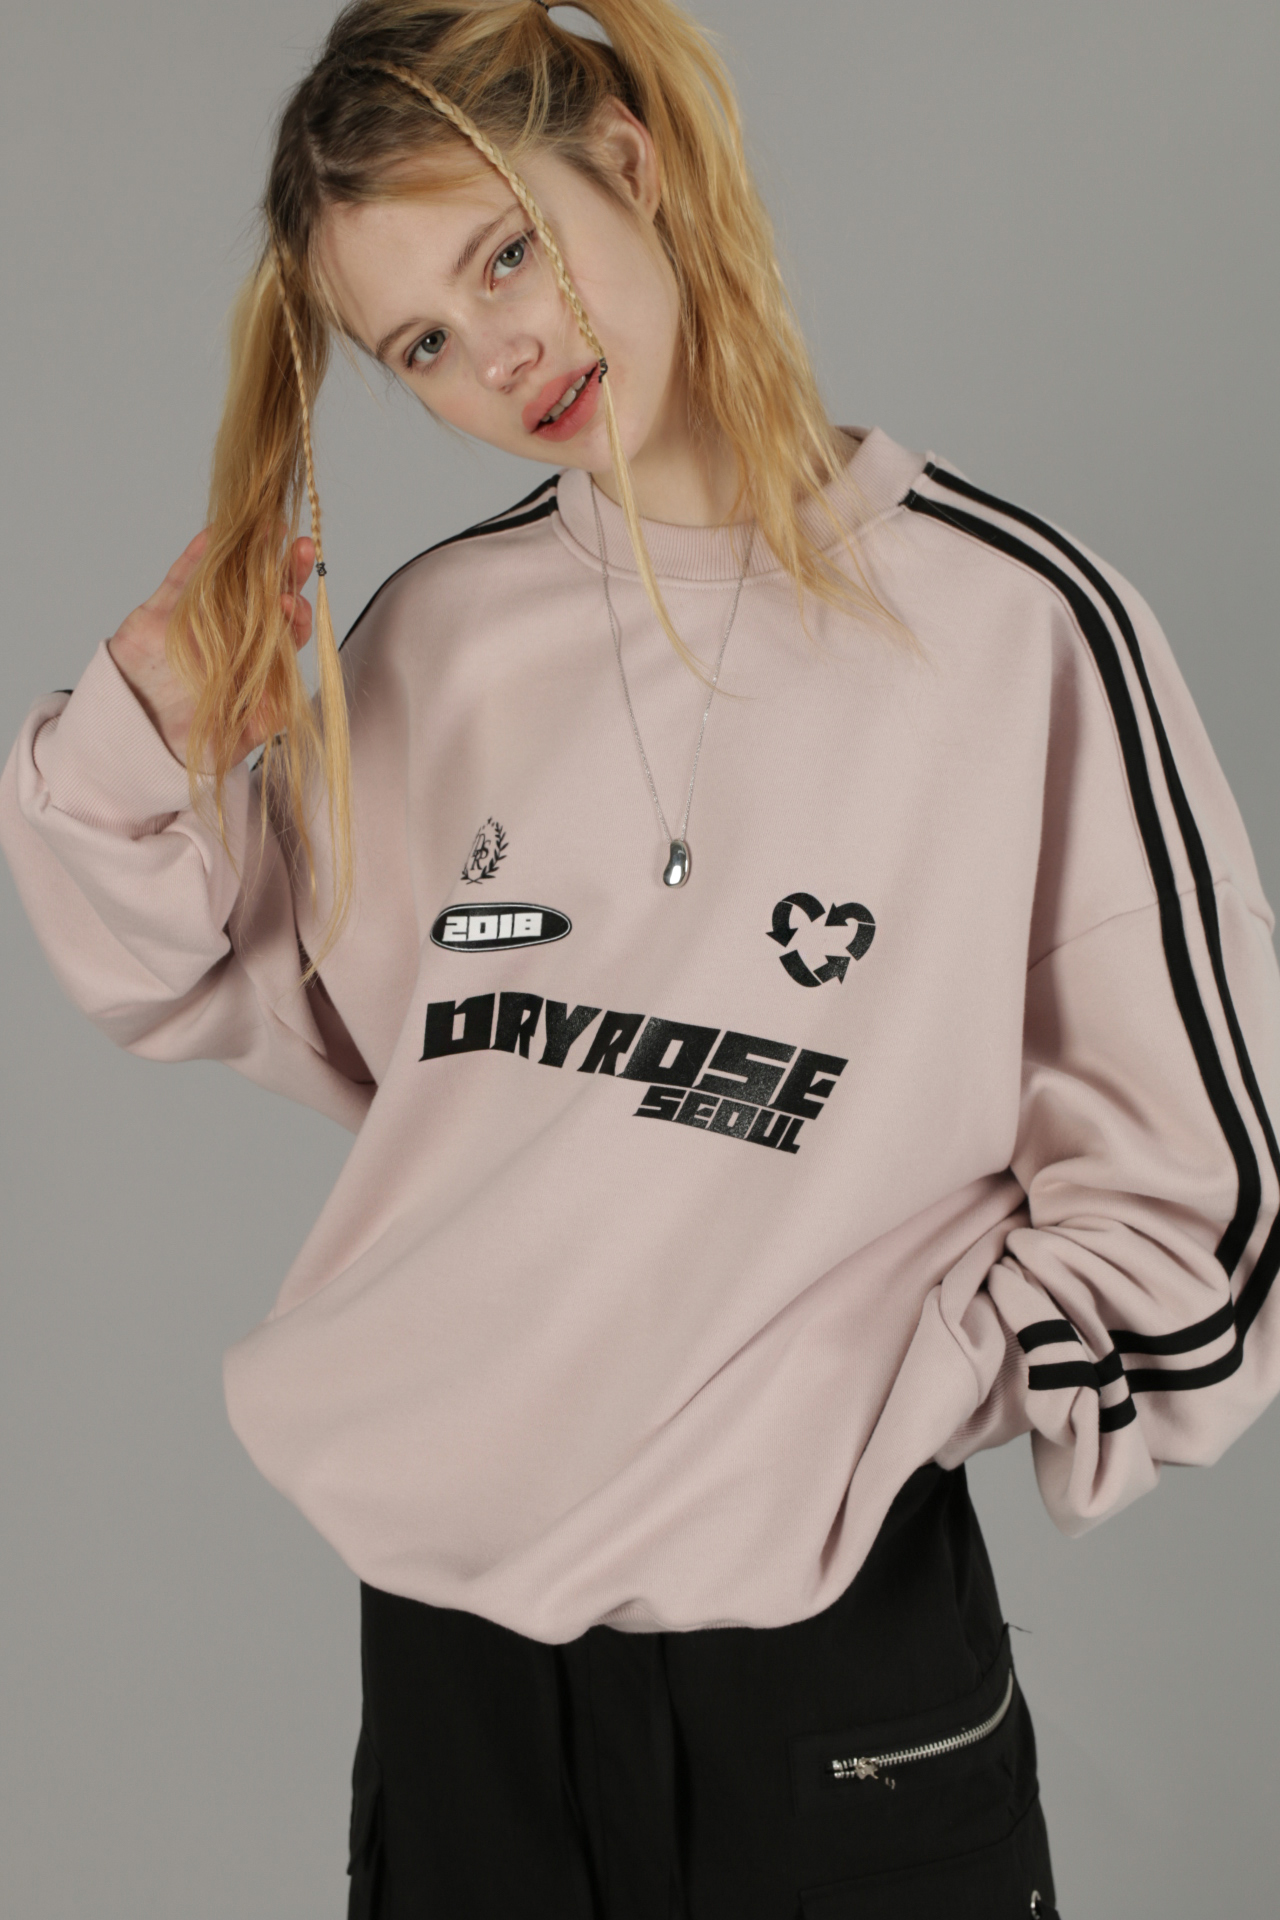 [2nd Pre-order] SIGNATURE LOGO SWEATSHIRTS (PINK) 4/12 이후 순차발송